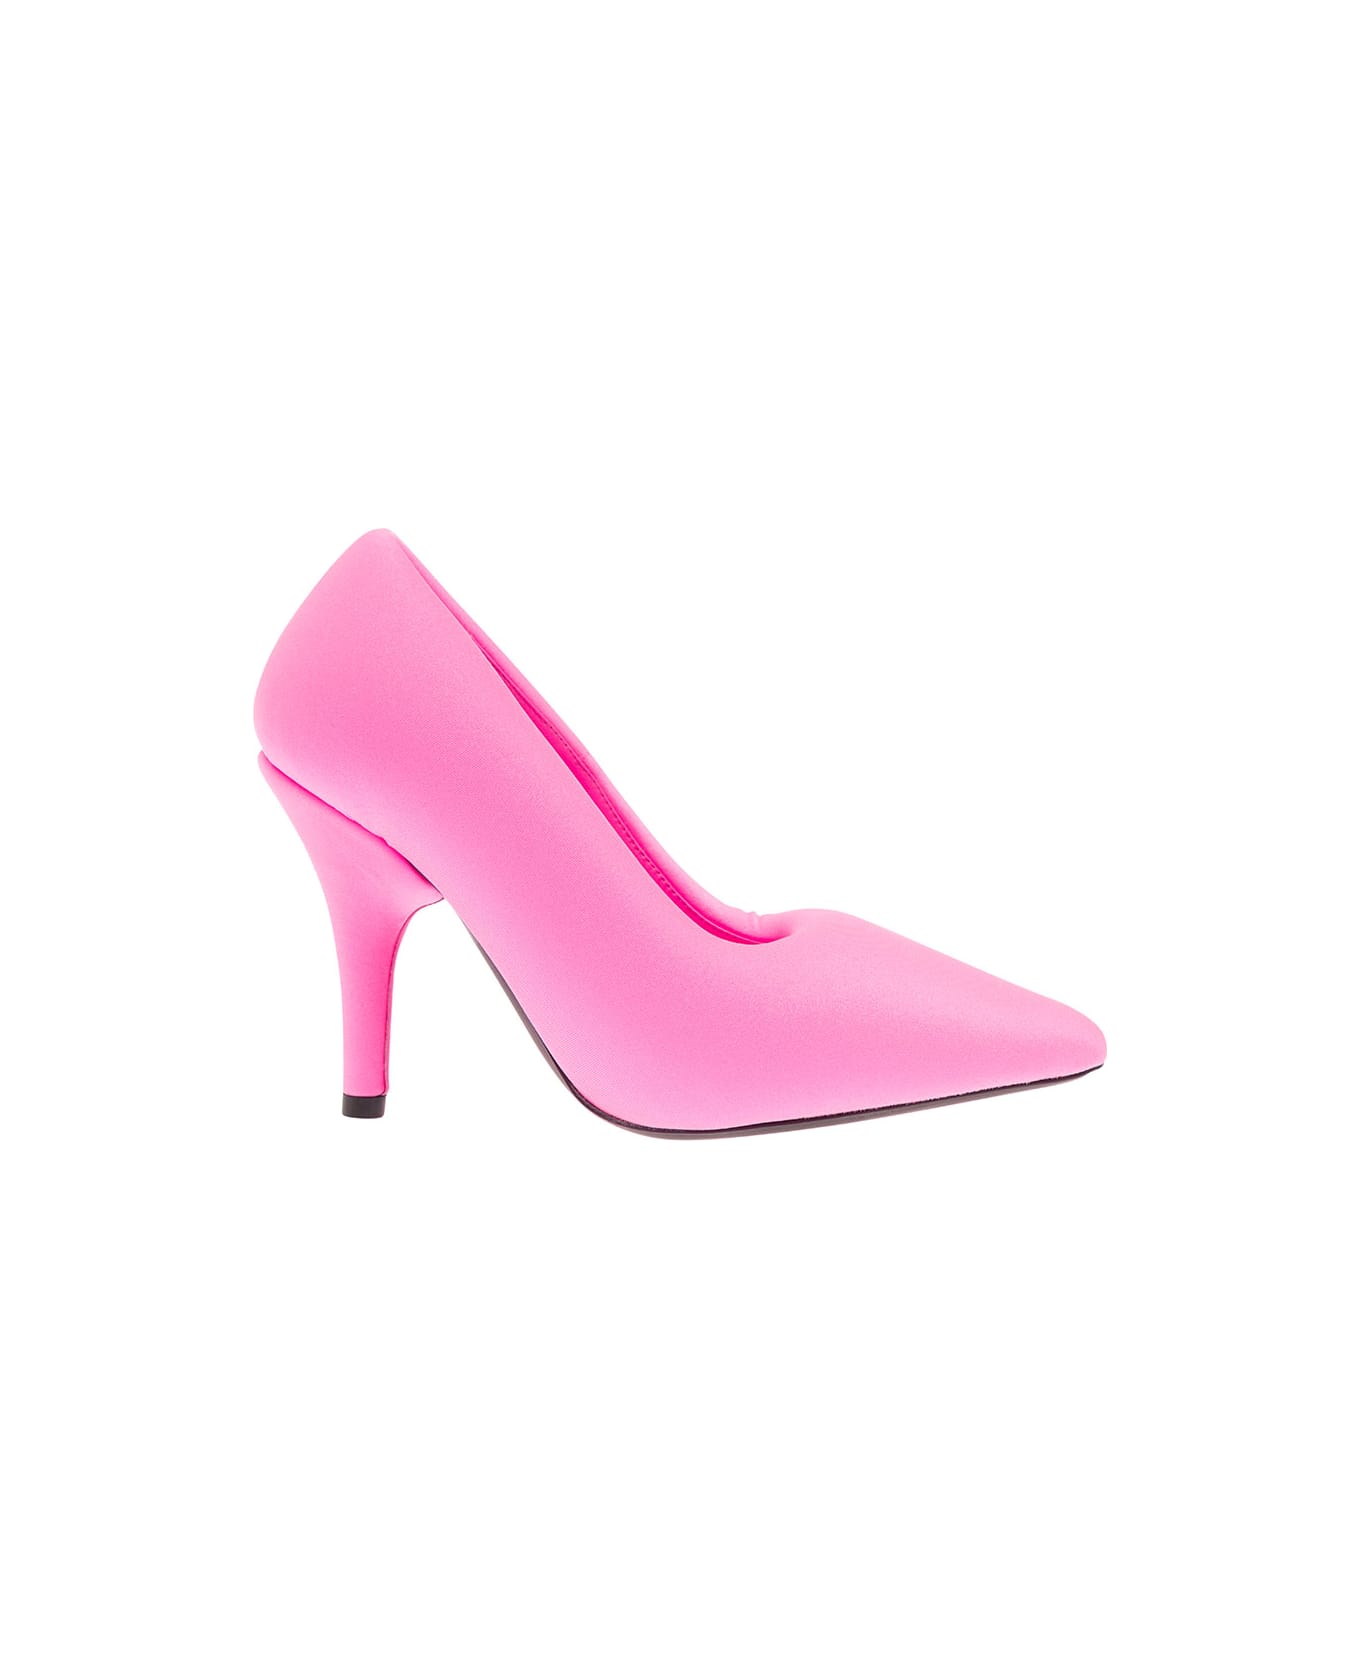 Balenciaga 'xl' Oversized Neon Pink Pump With Knife Heel In Spandex Woman - Pink ハイヒール